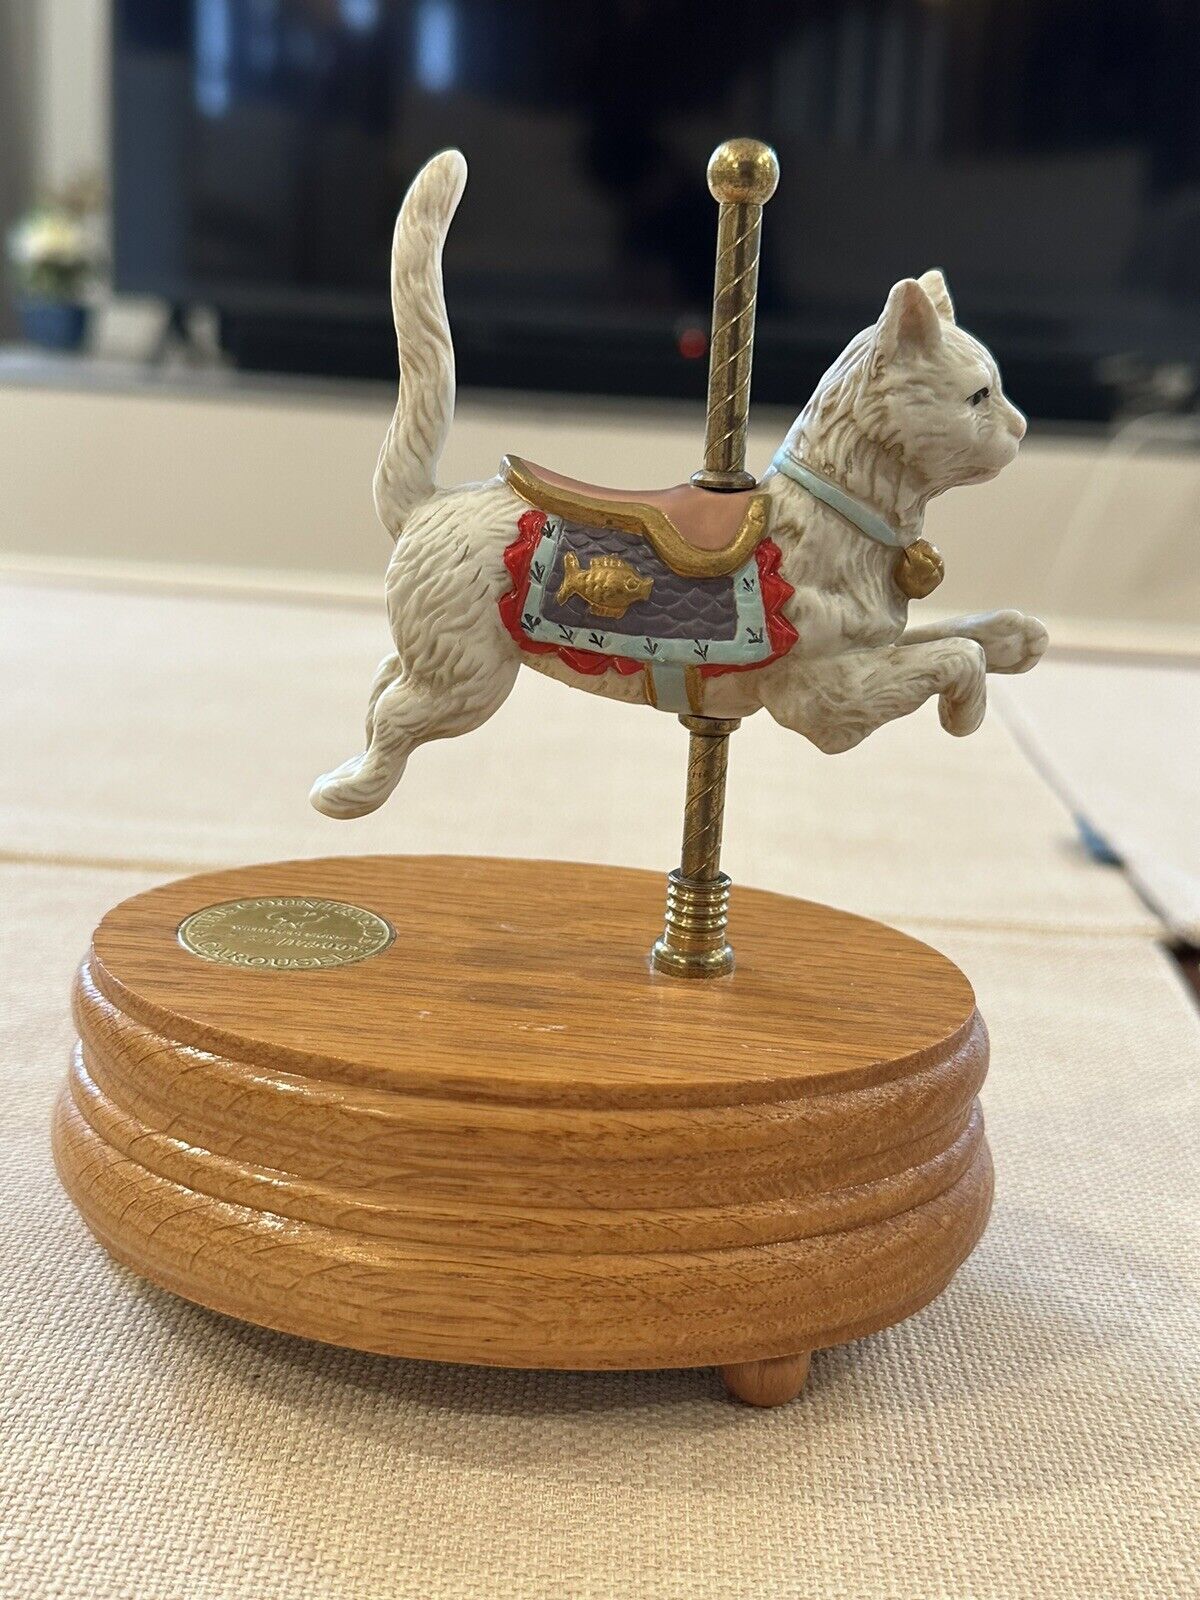 Limited Willitts Designs The Countryside Carousel Cat Figurine #734 Of 17500